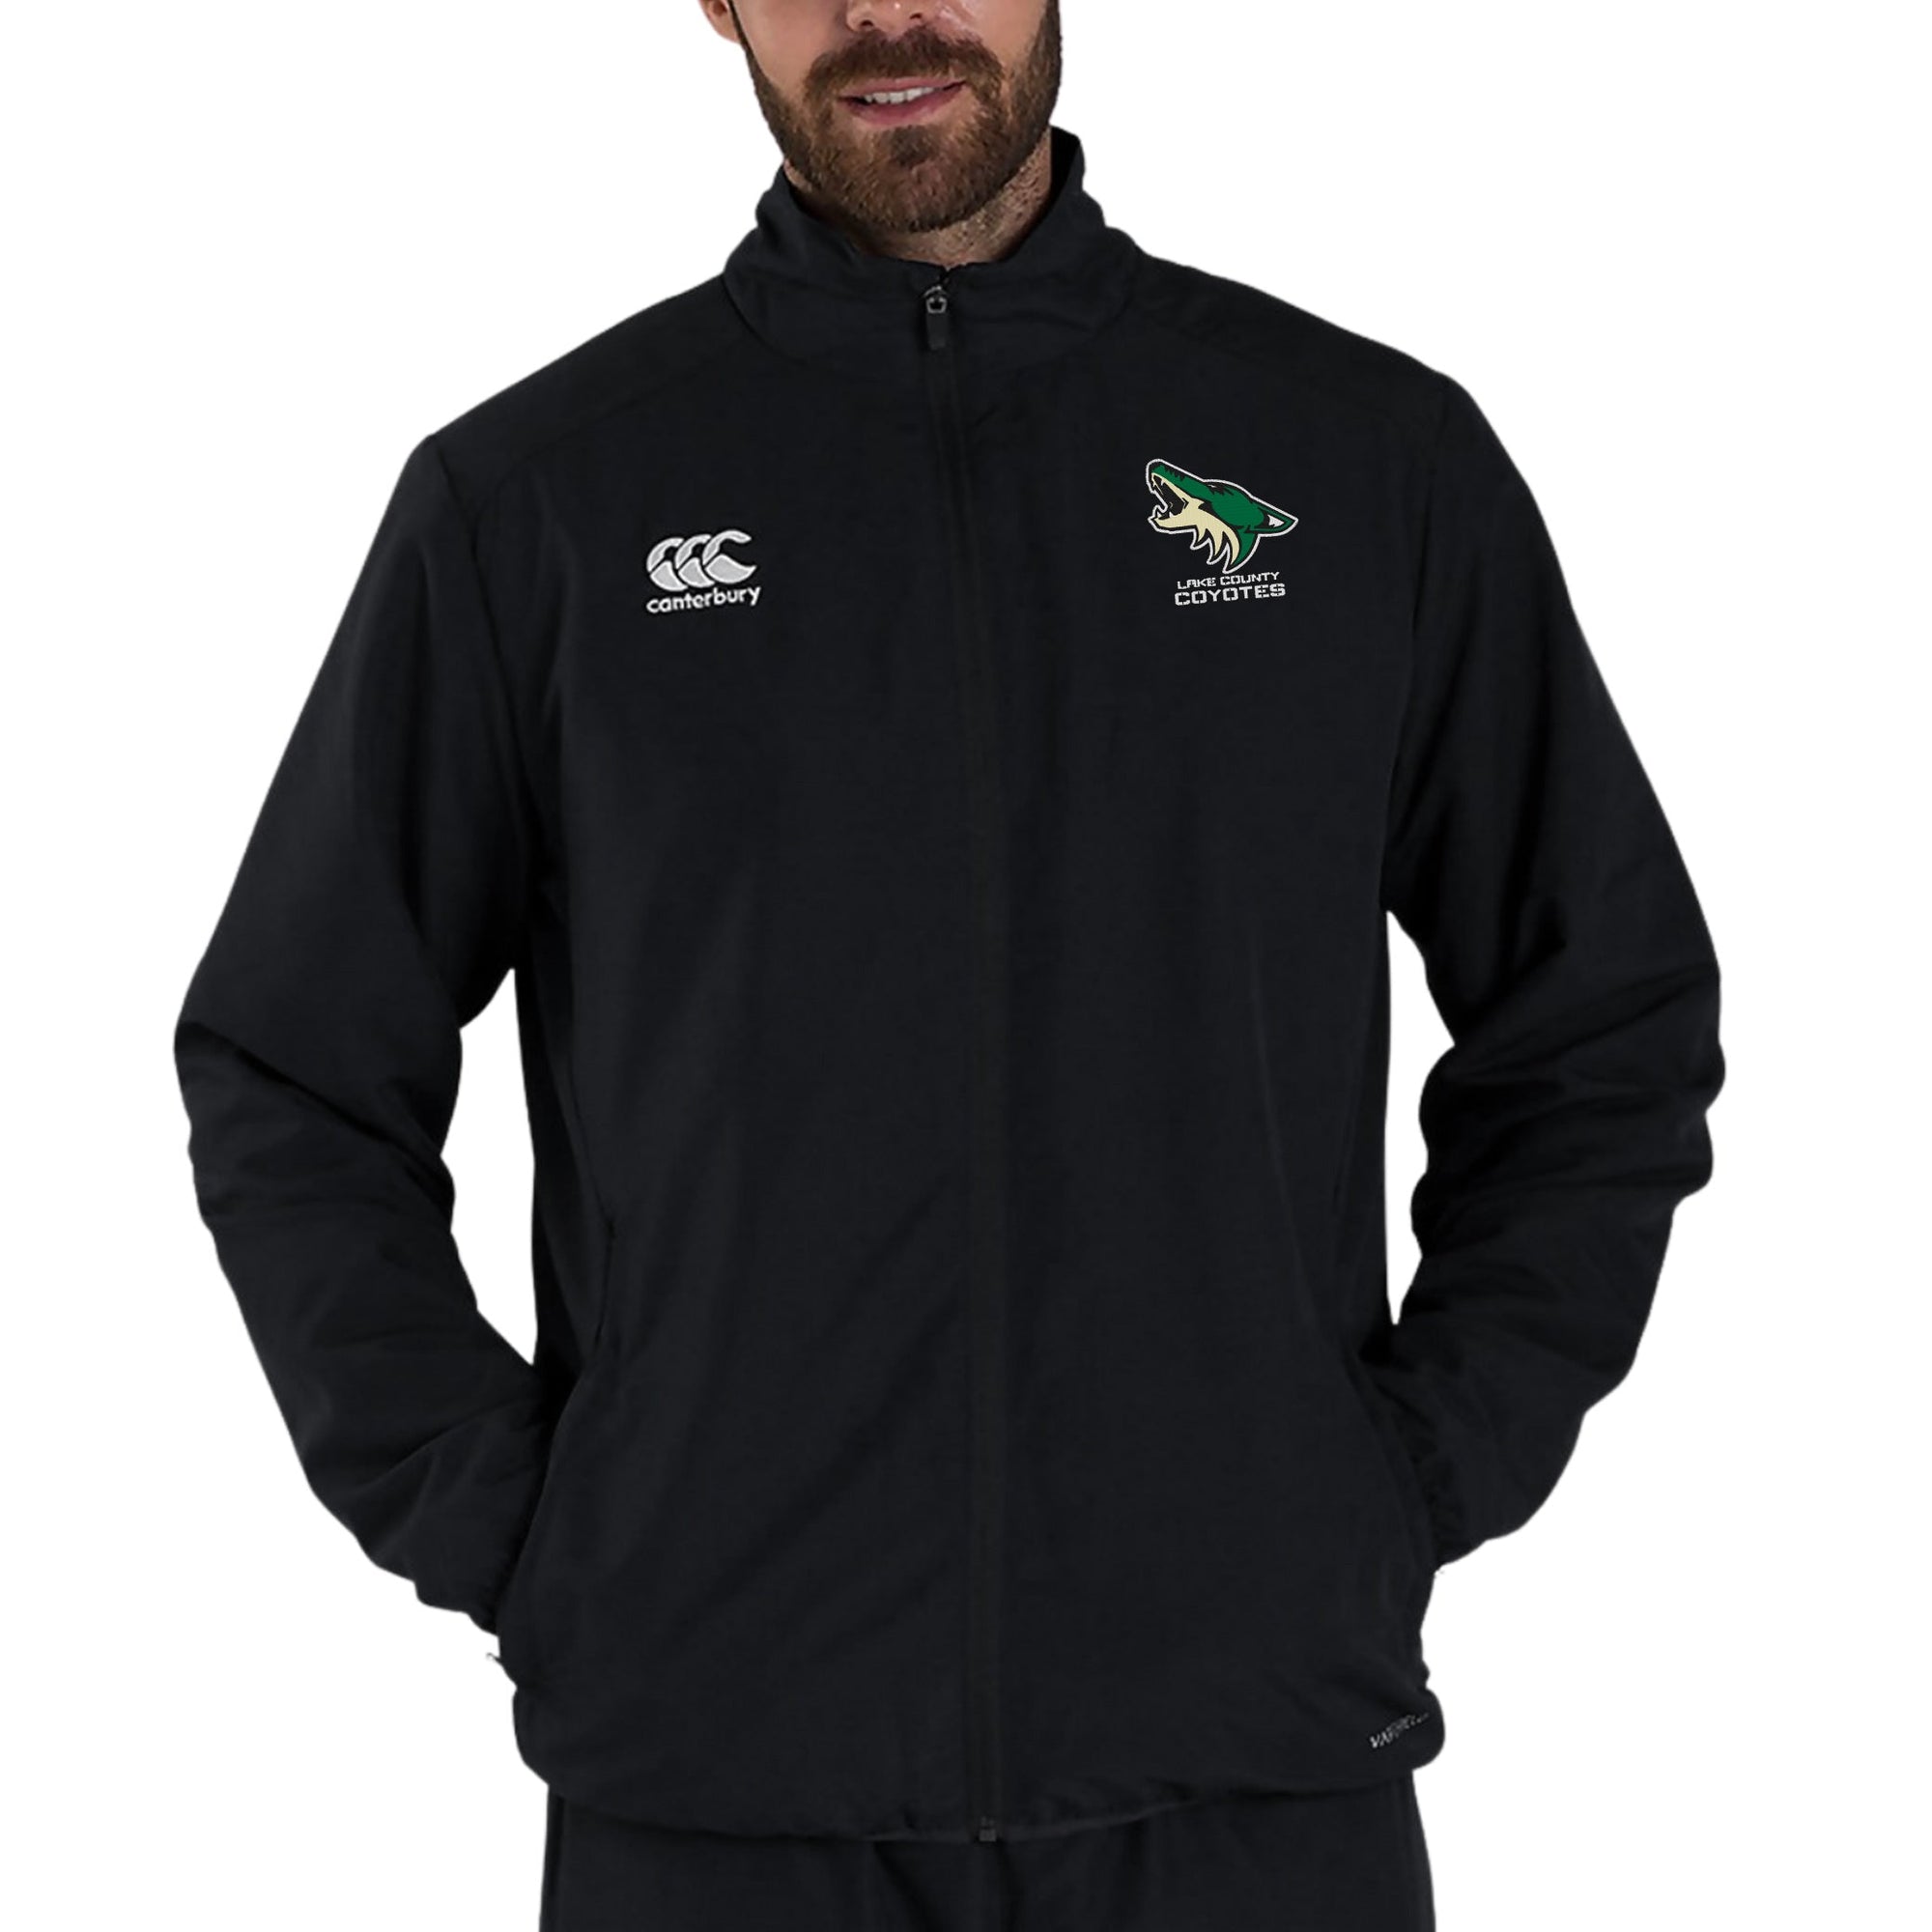 Rugby Imports Lake County CCC Track Jacket